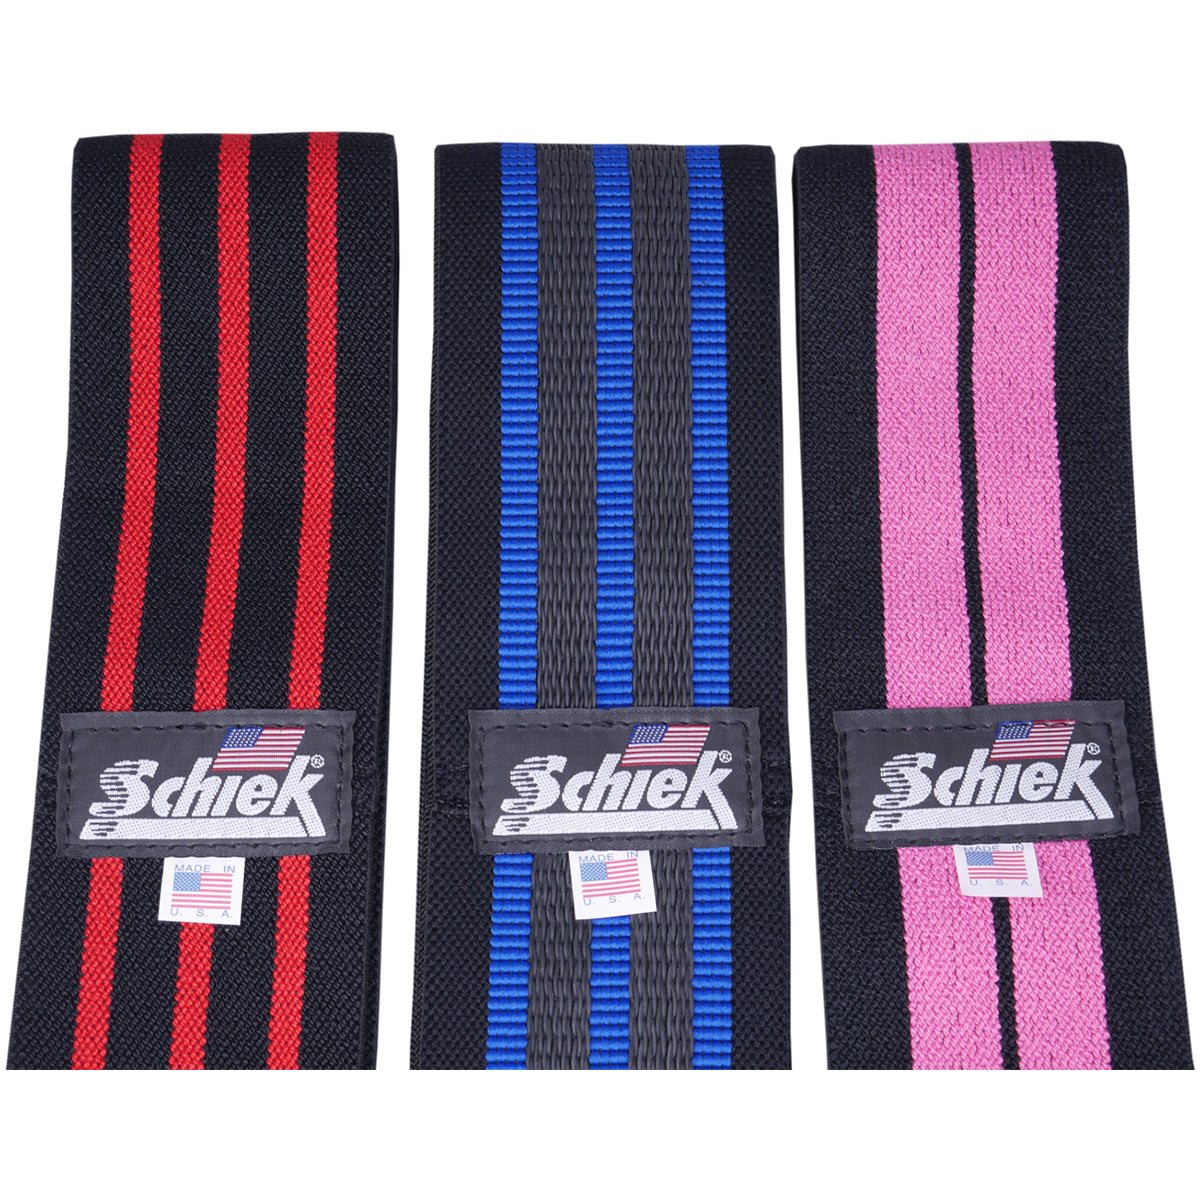 Schiek Sports Model 1180HB Fitness and Exercise Hip Bands 3-Pack Schiek Sports